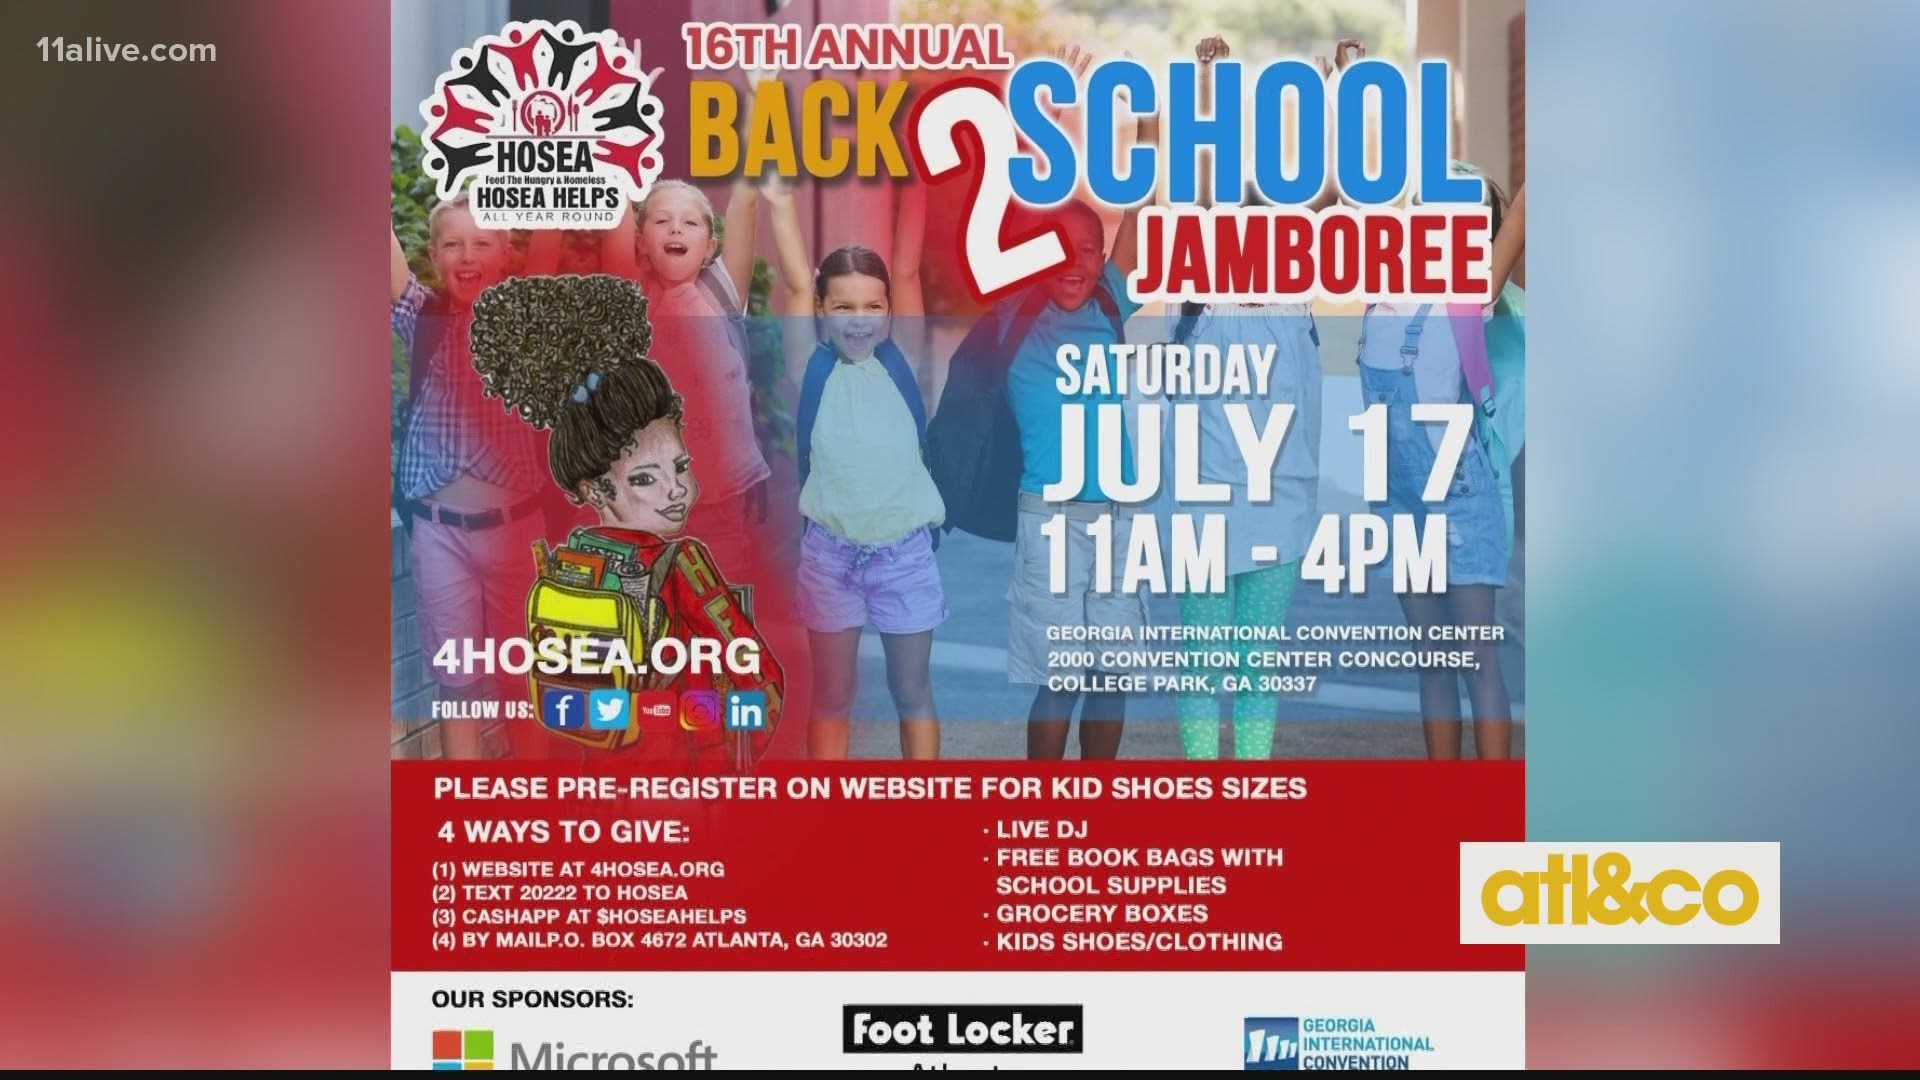 Join Hosea Helps tomorrow, Saturday, July 17 as they provide more than 1,000 underserved students free book bags with school supplies.